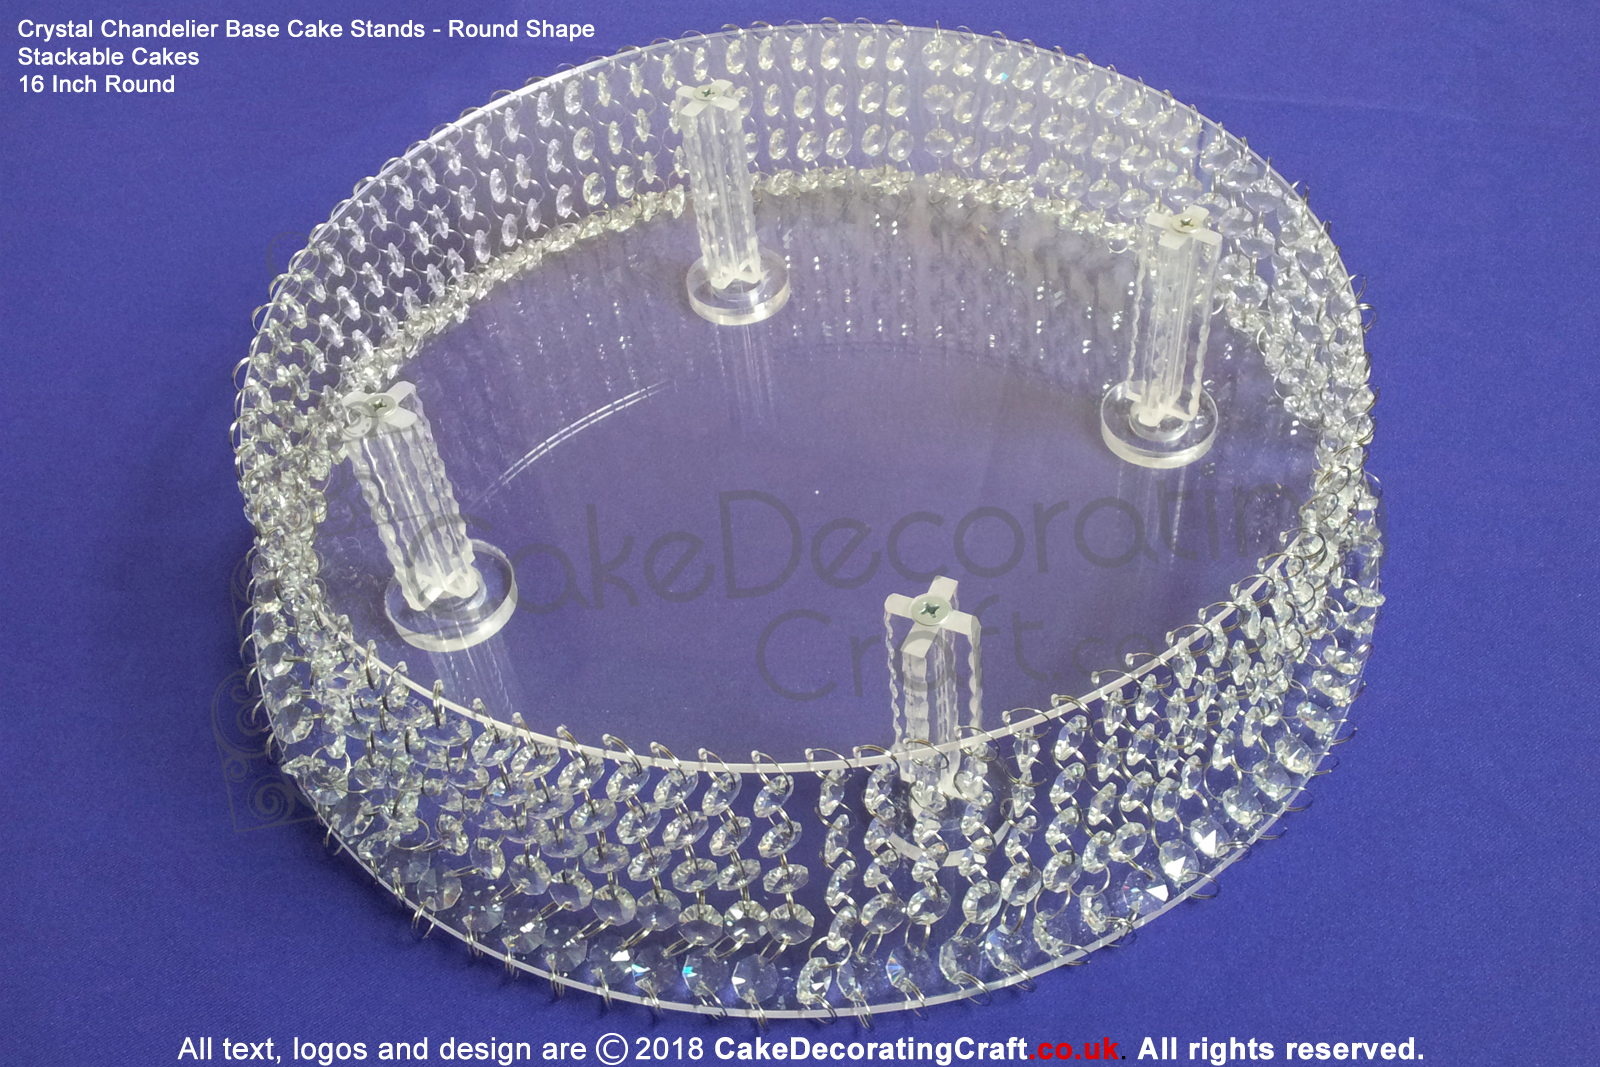 Chandelier Crystal Cake Base Stands | Stackable Wedding Cakes Display | 16.5" Round Plate 10 cm Height | Single Base Stand | Real Glass Diamond Crystals